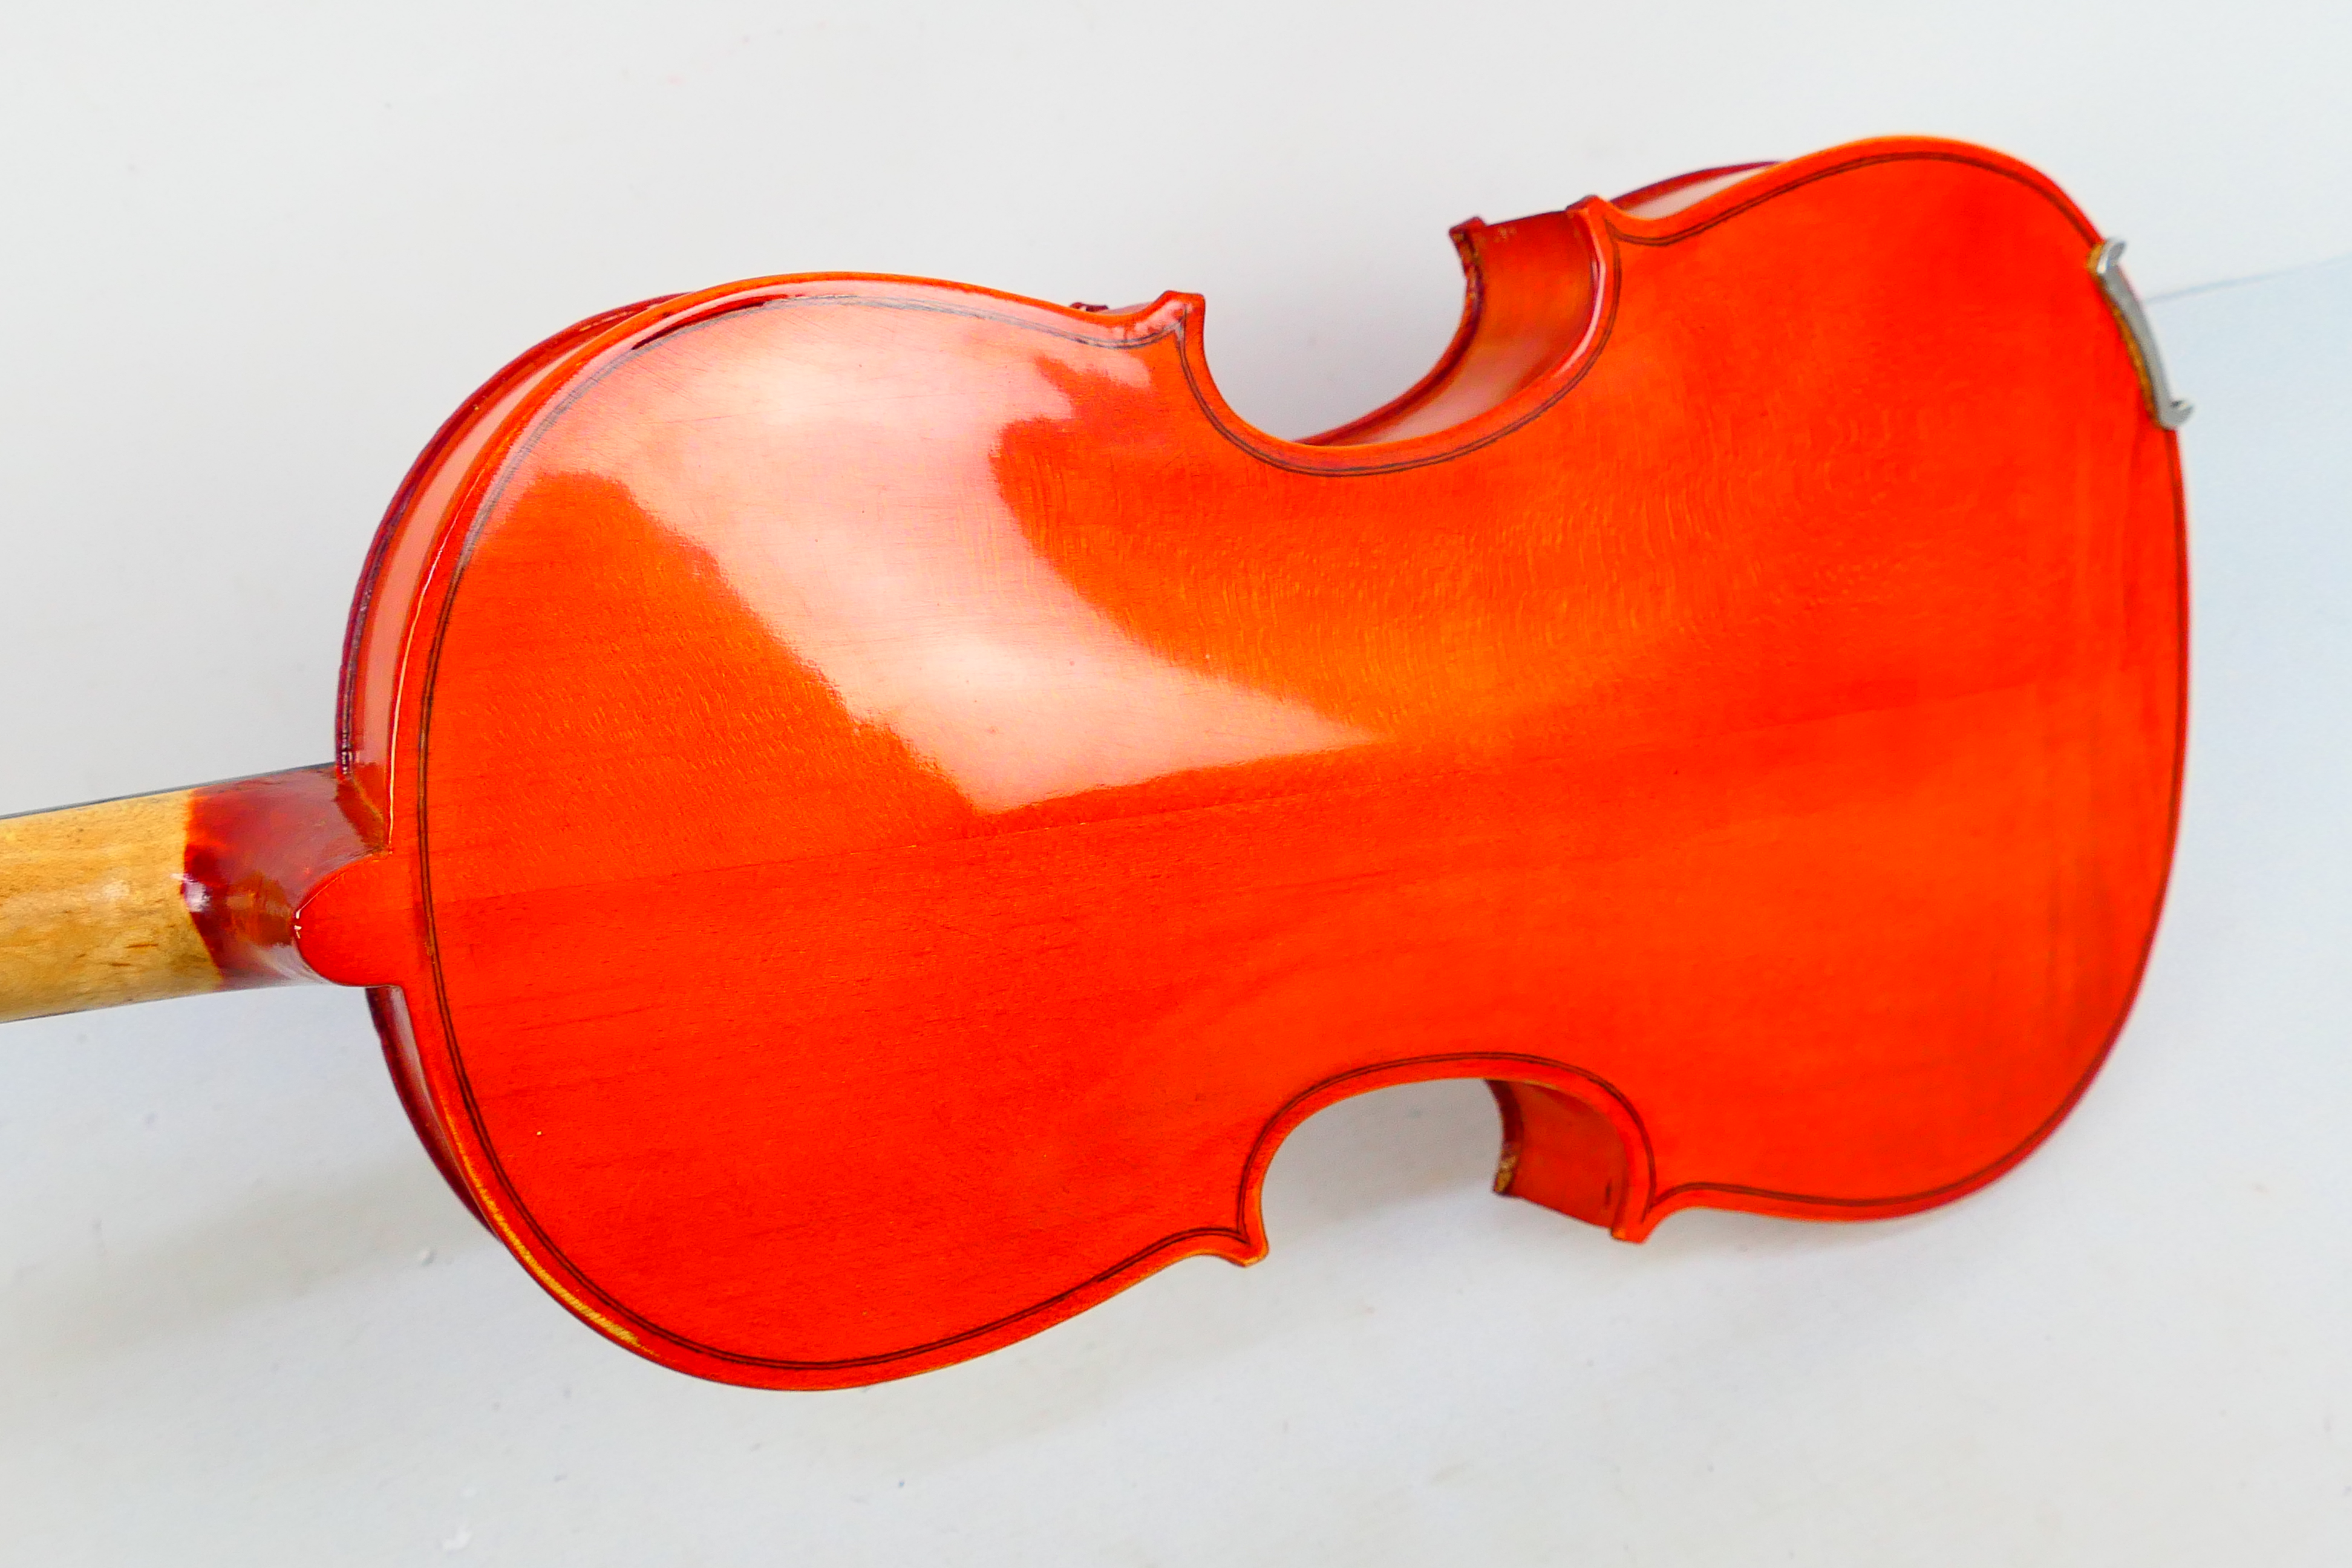 A Stentor Student violin, 59.5 cm (l), t - Image 12 of 14